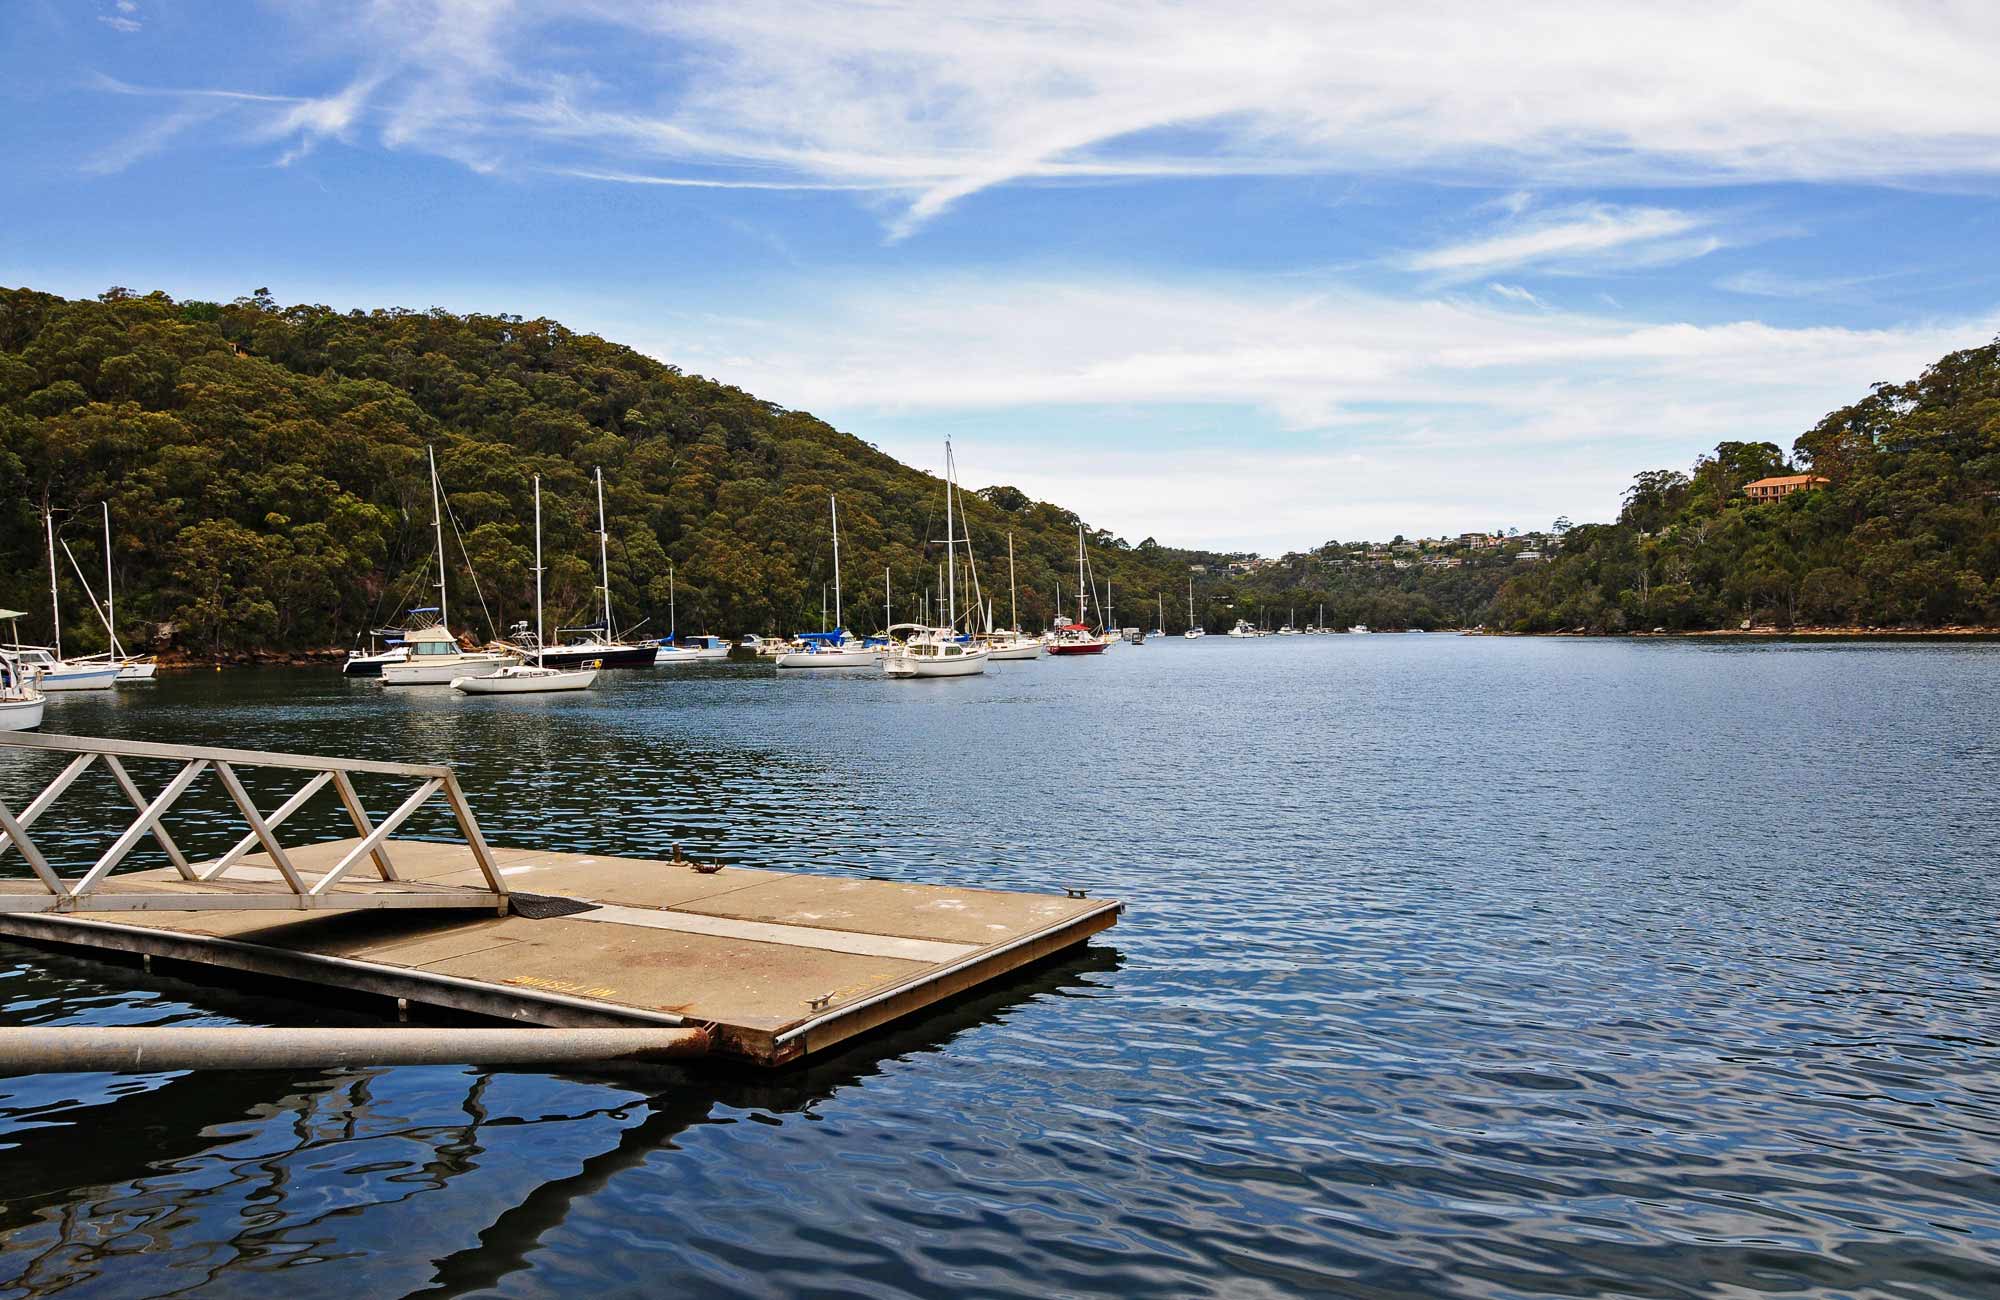 Boat jetty, Garigal National Park. Photo: Kevin McGrath